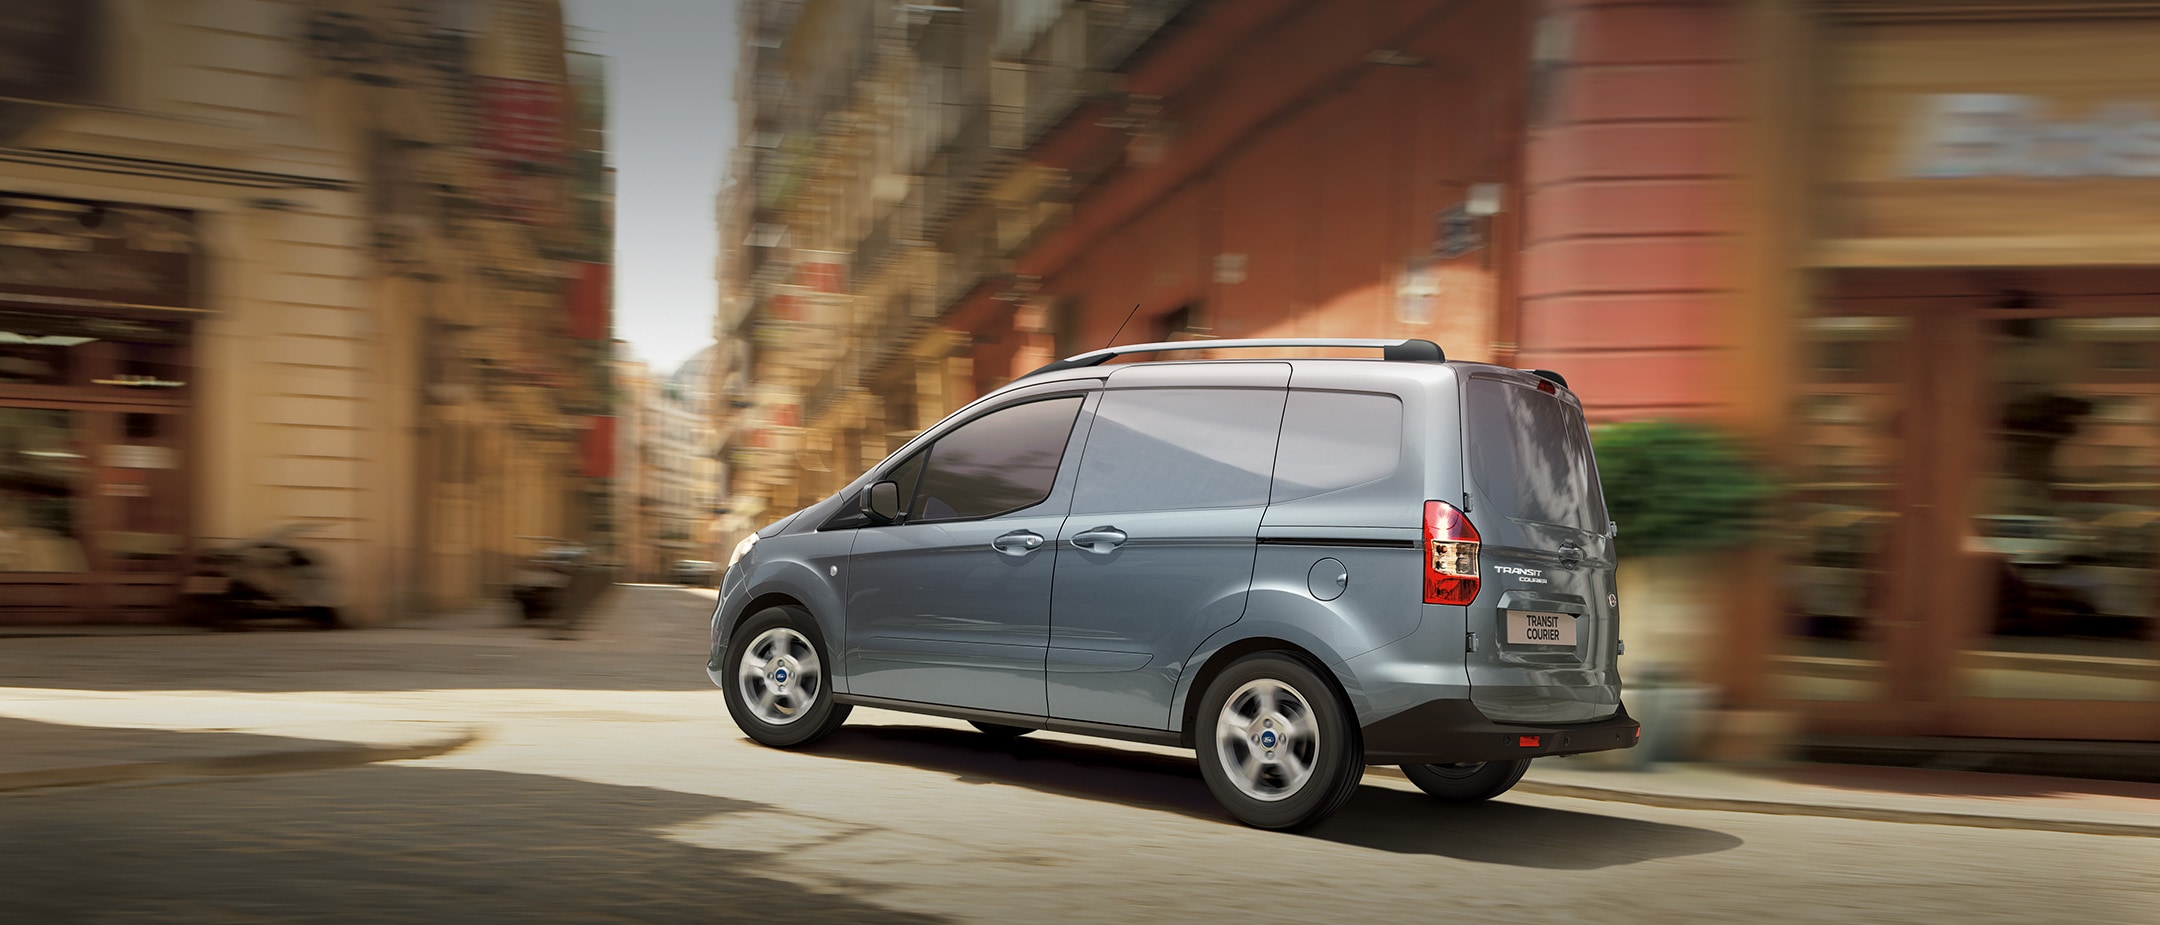 New Silver Ford Transit Courier in city lanes